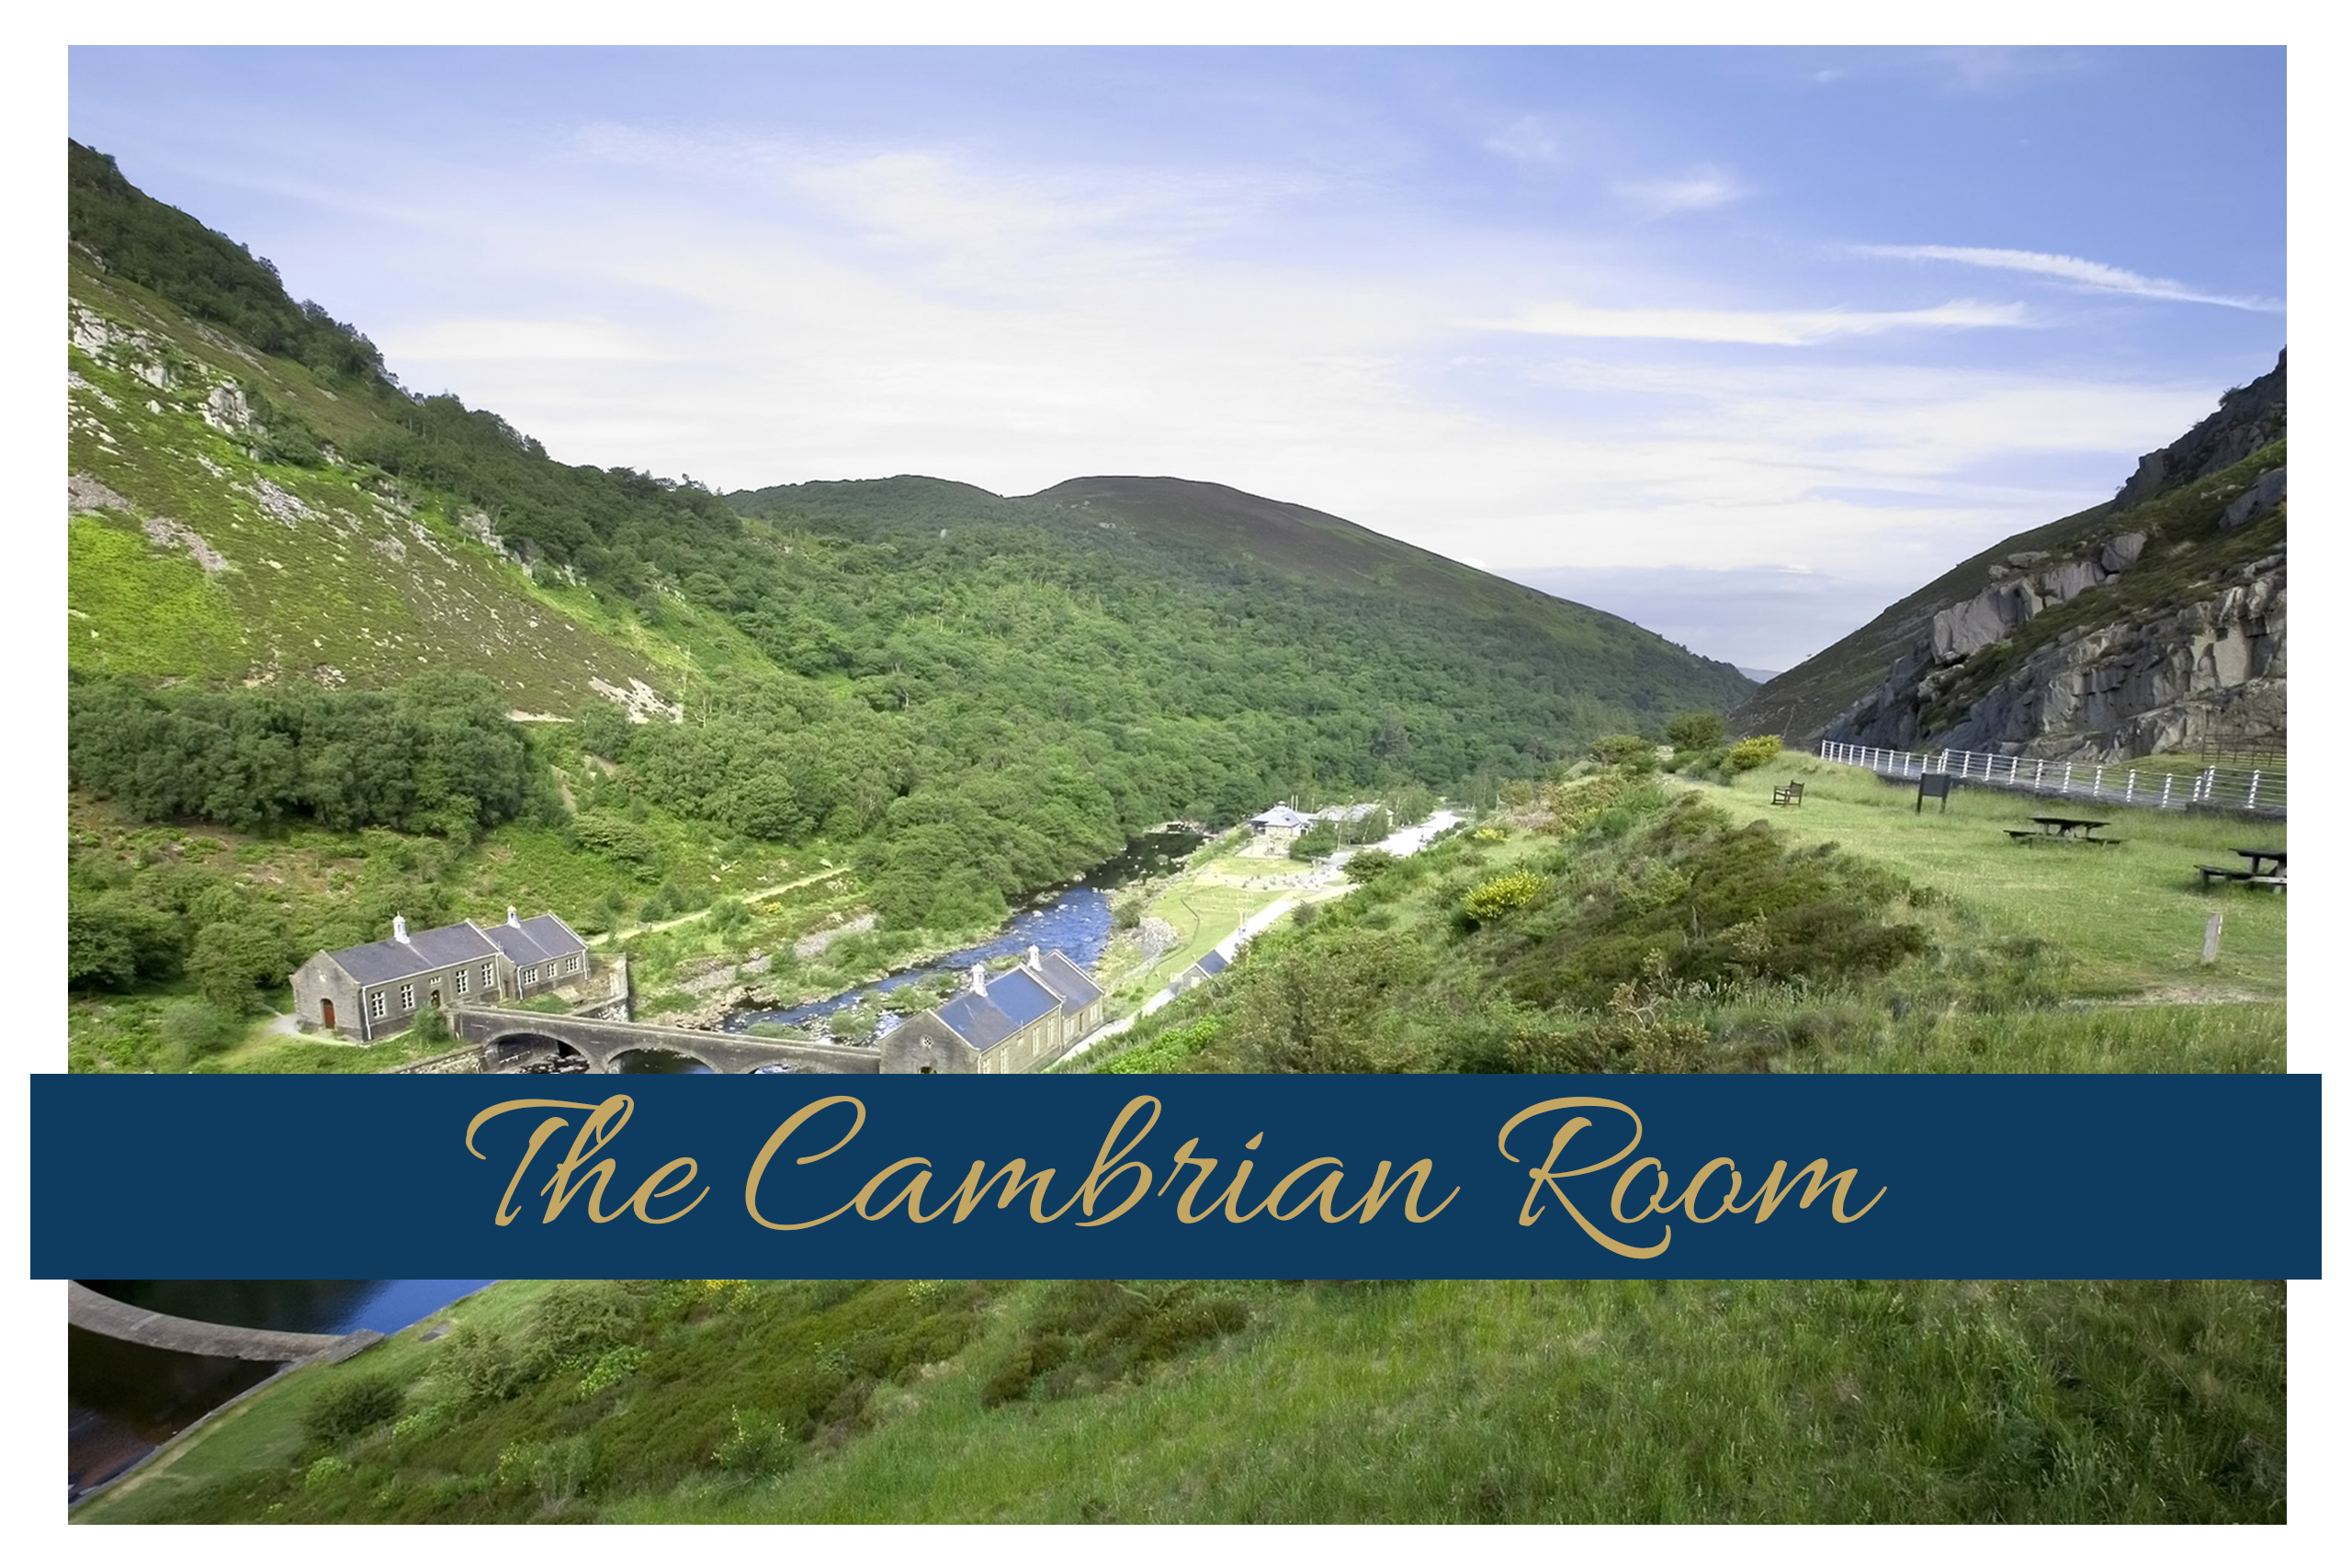 The Cambrian Room